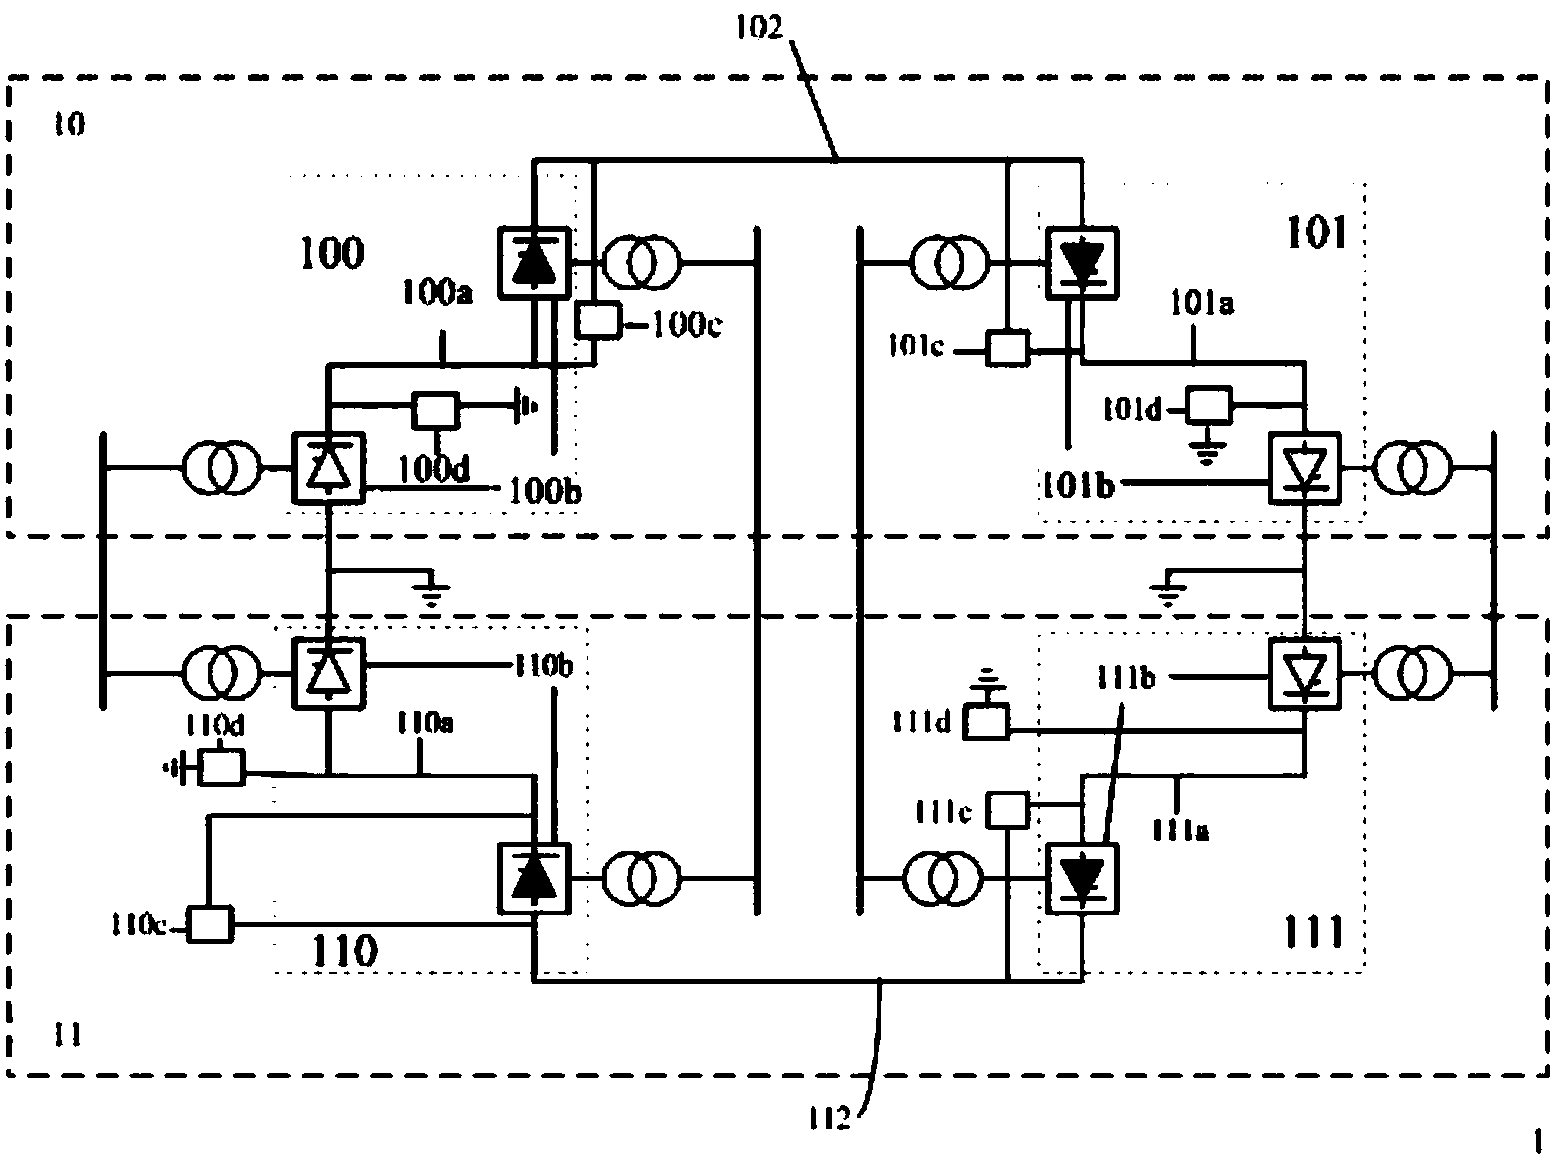 Series multi-terminal direct-current power transmission system